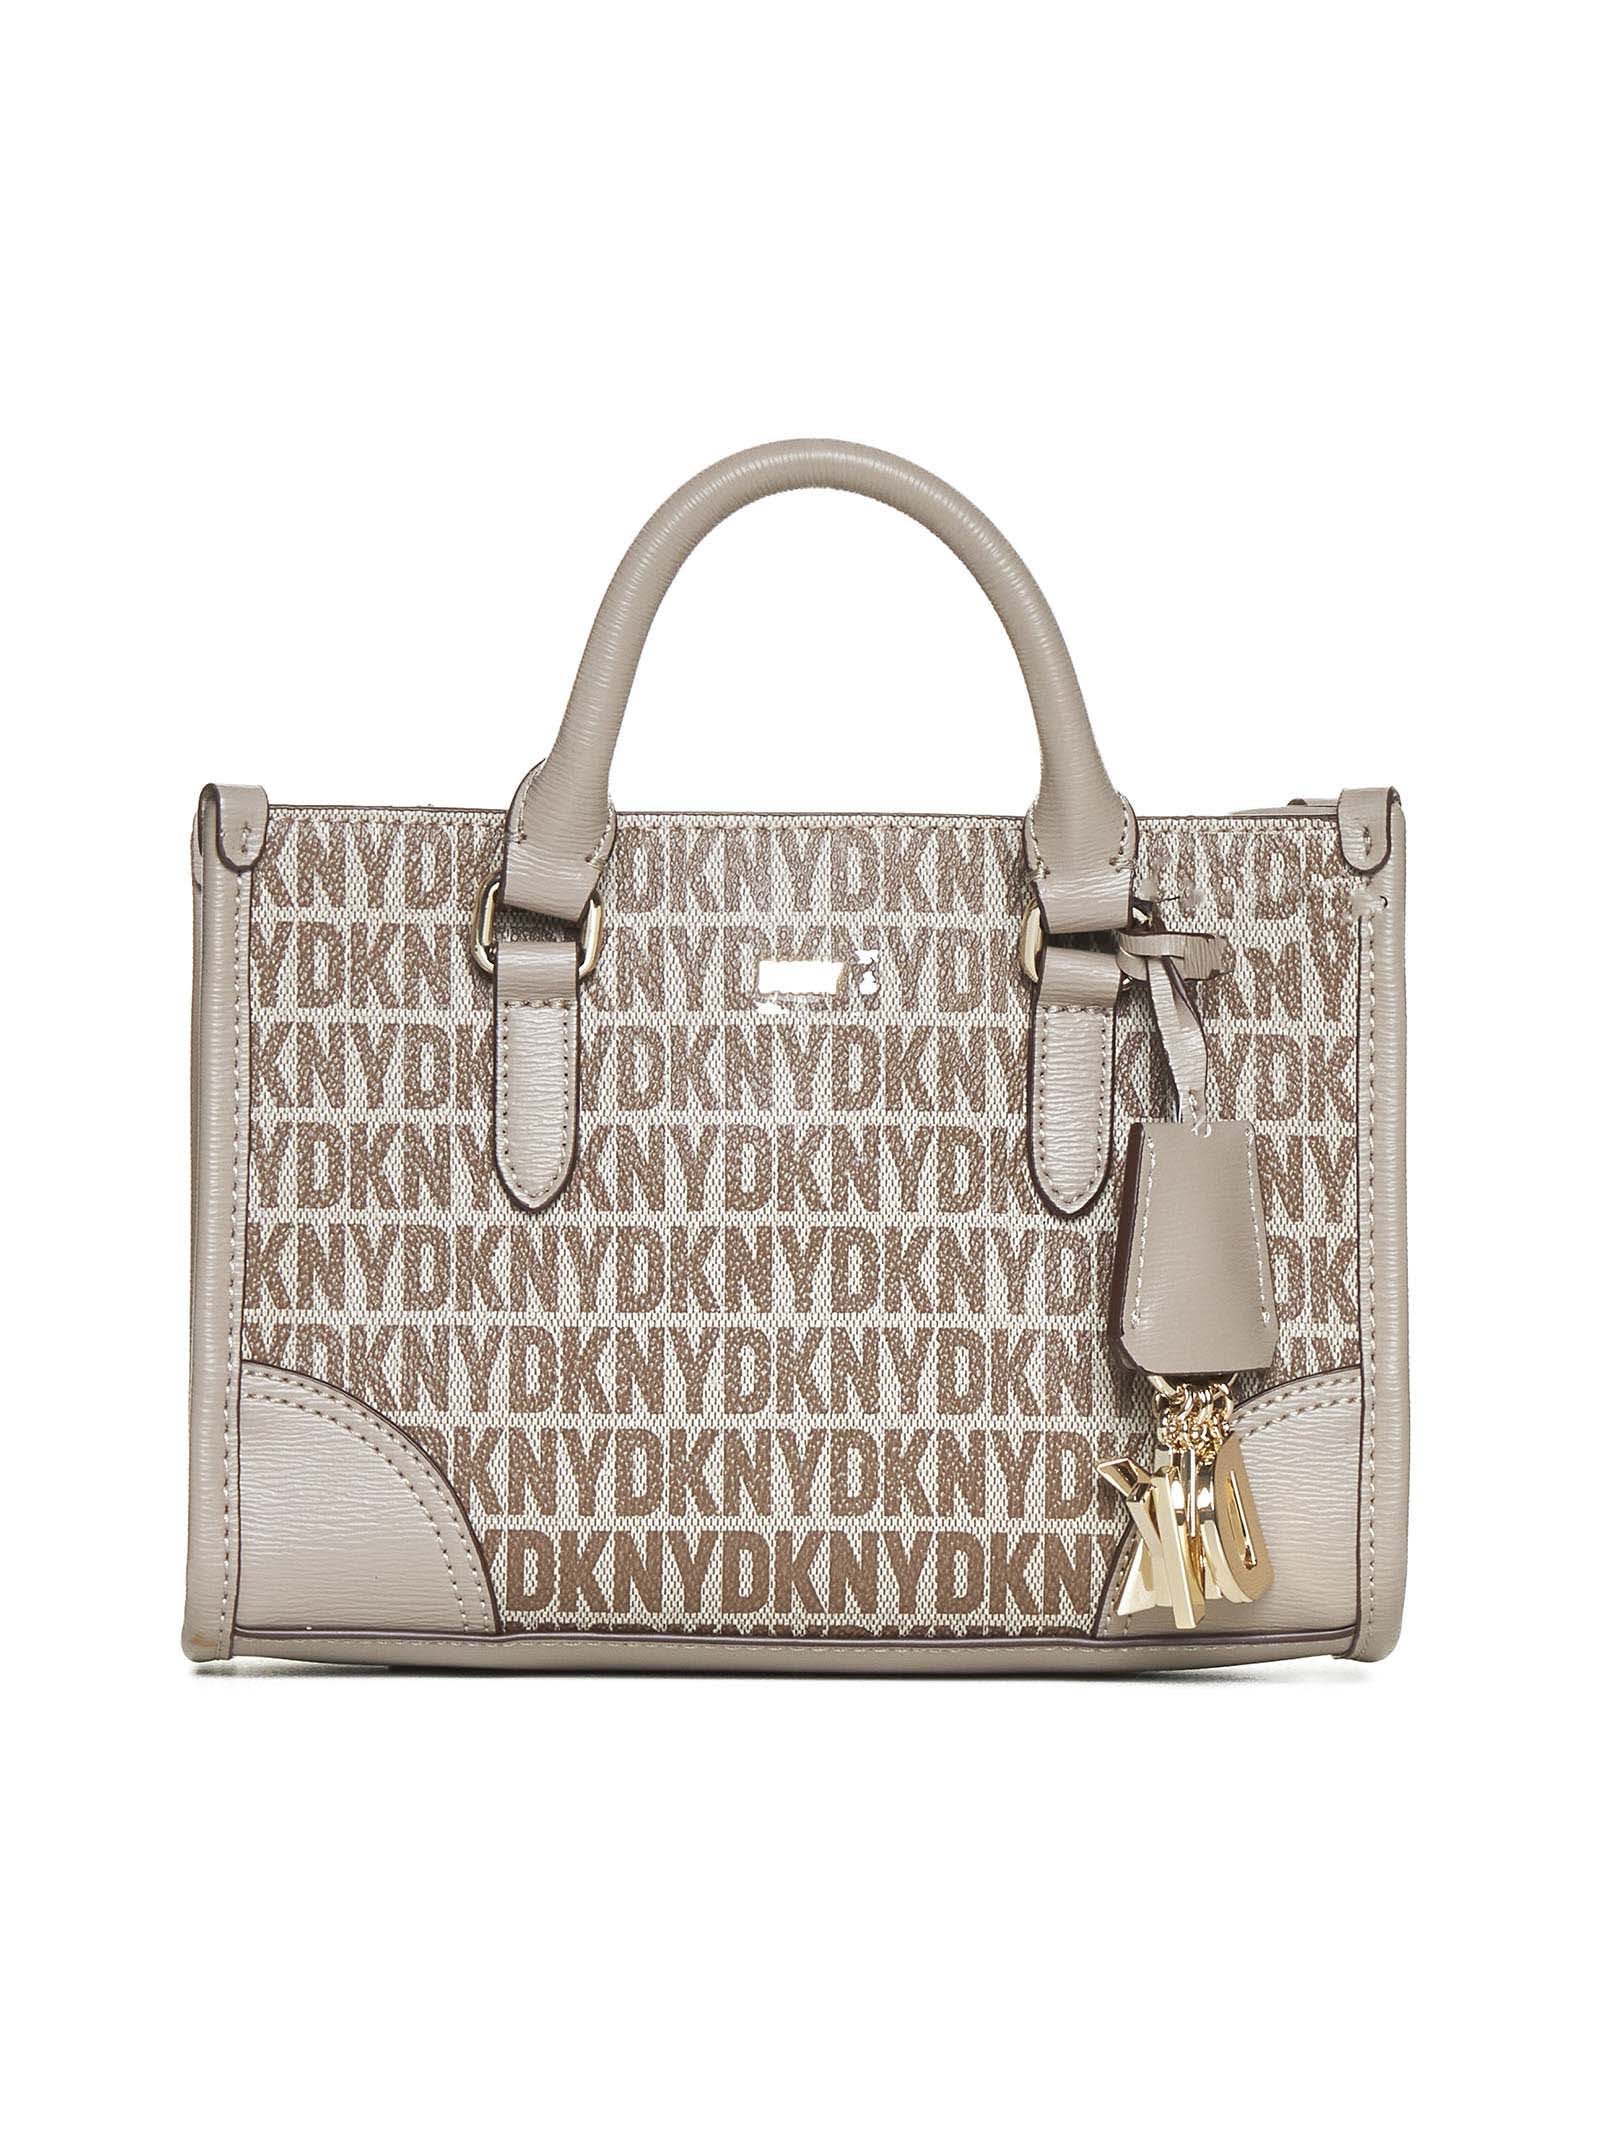 Dkny Tote In Chino/toffee